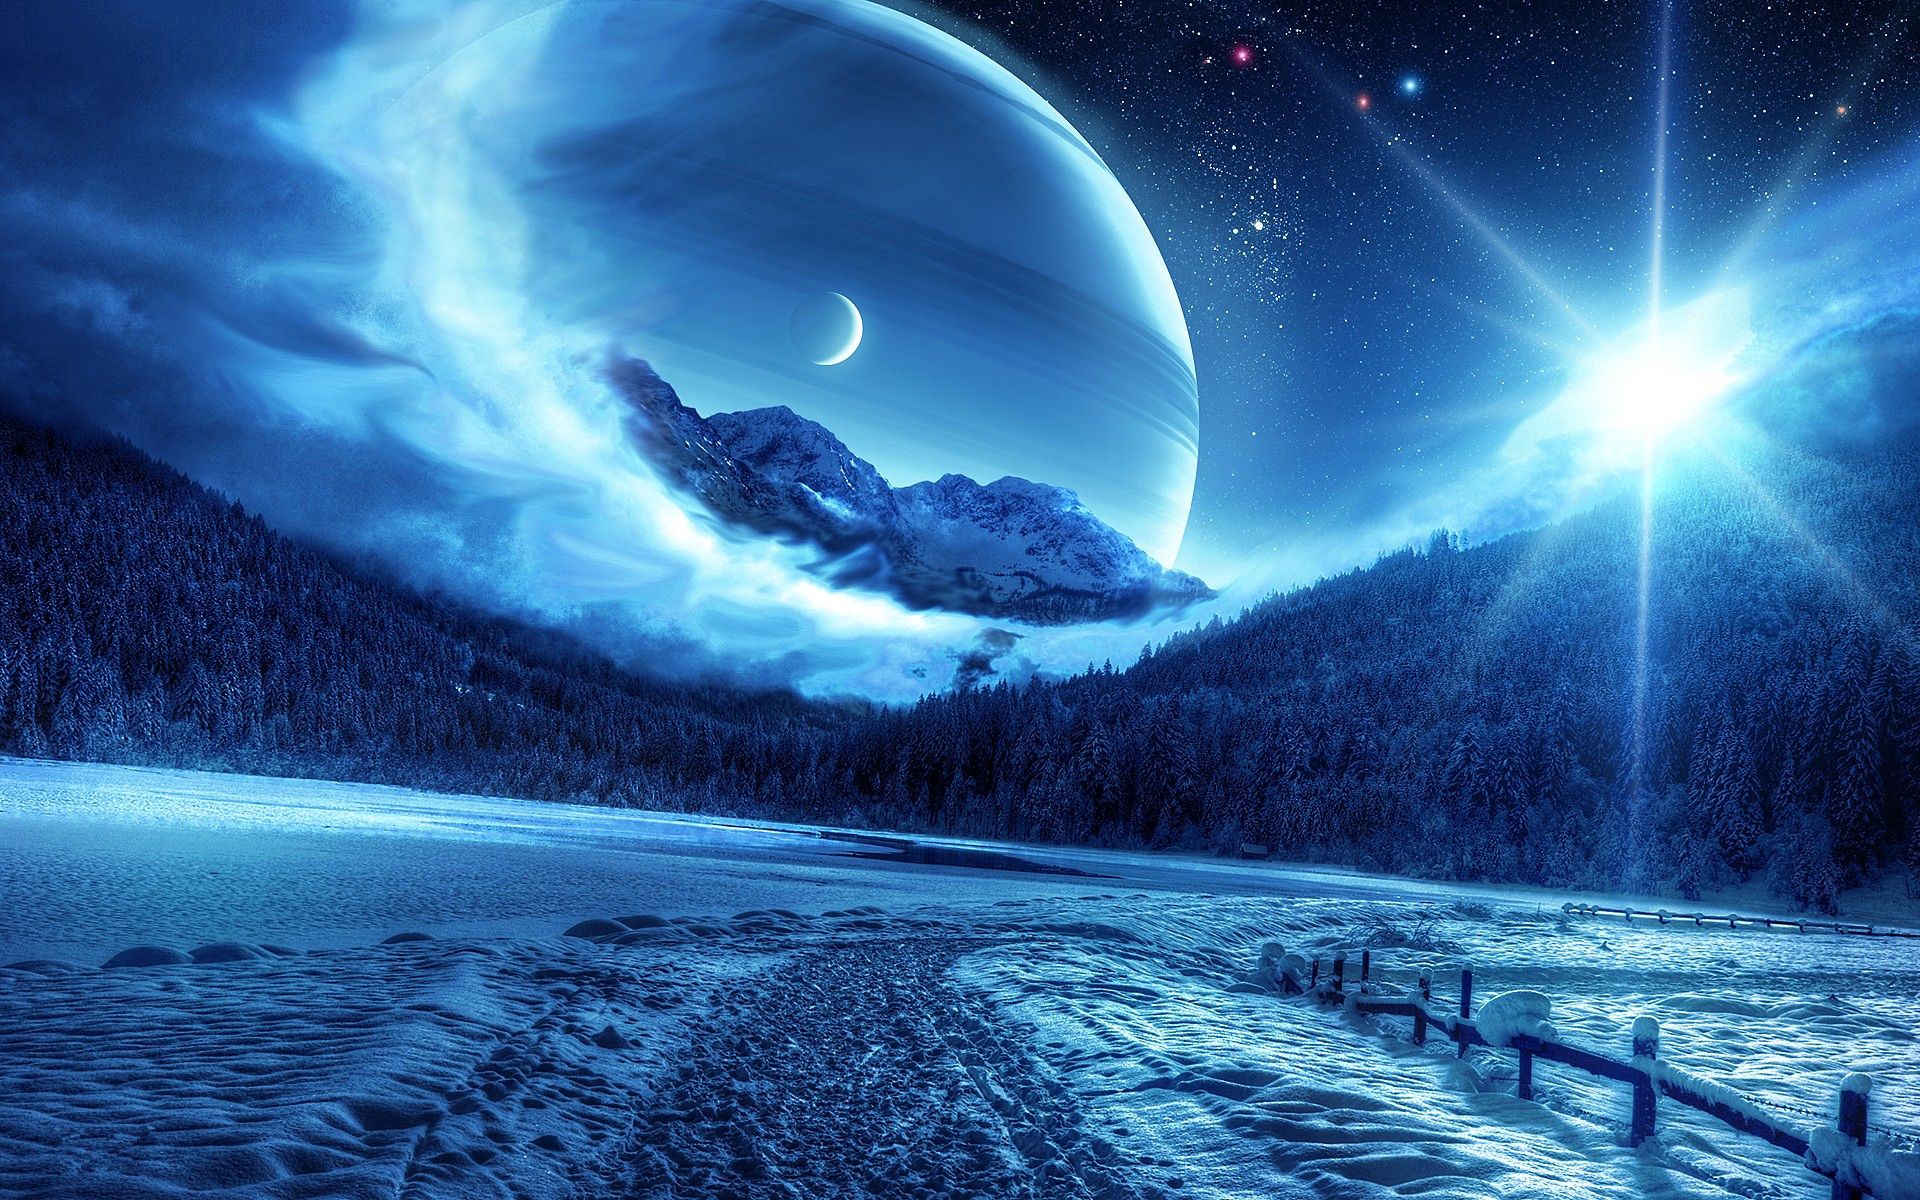 planets, nature, winter, mountains, night, road, fantastic landscape